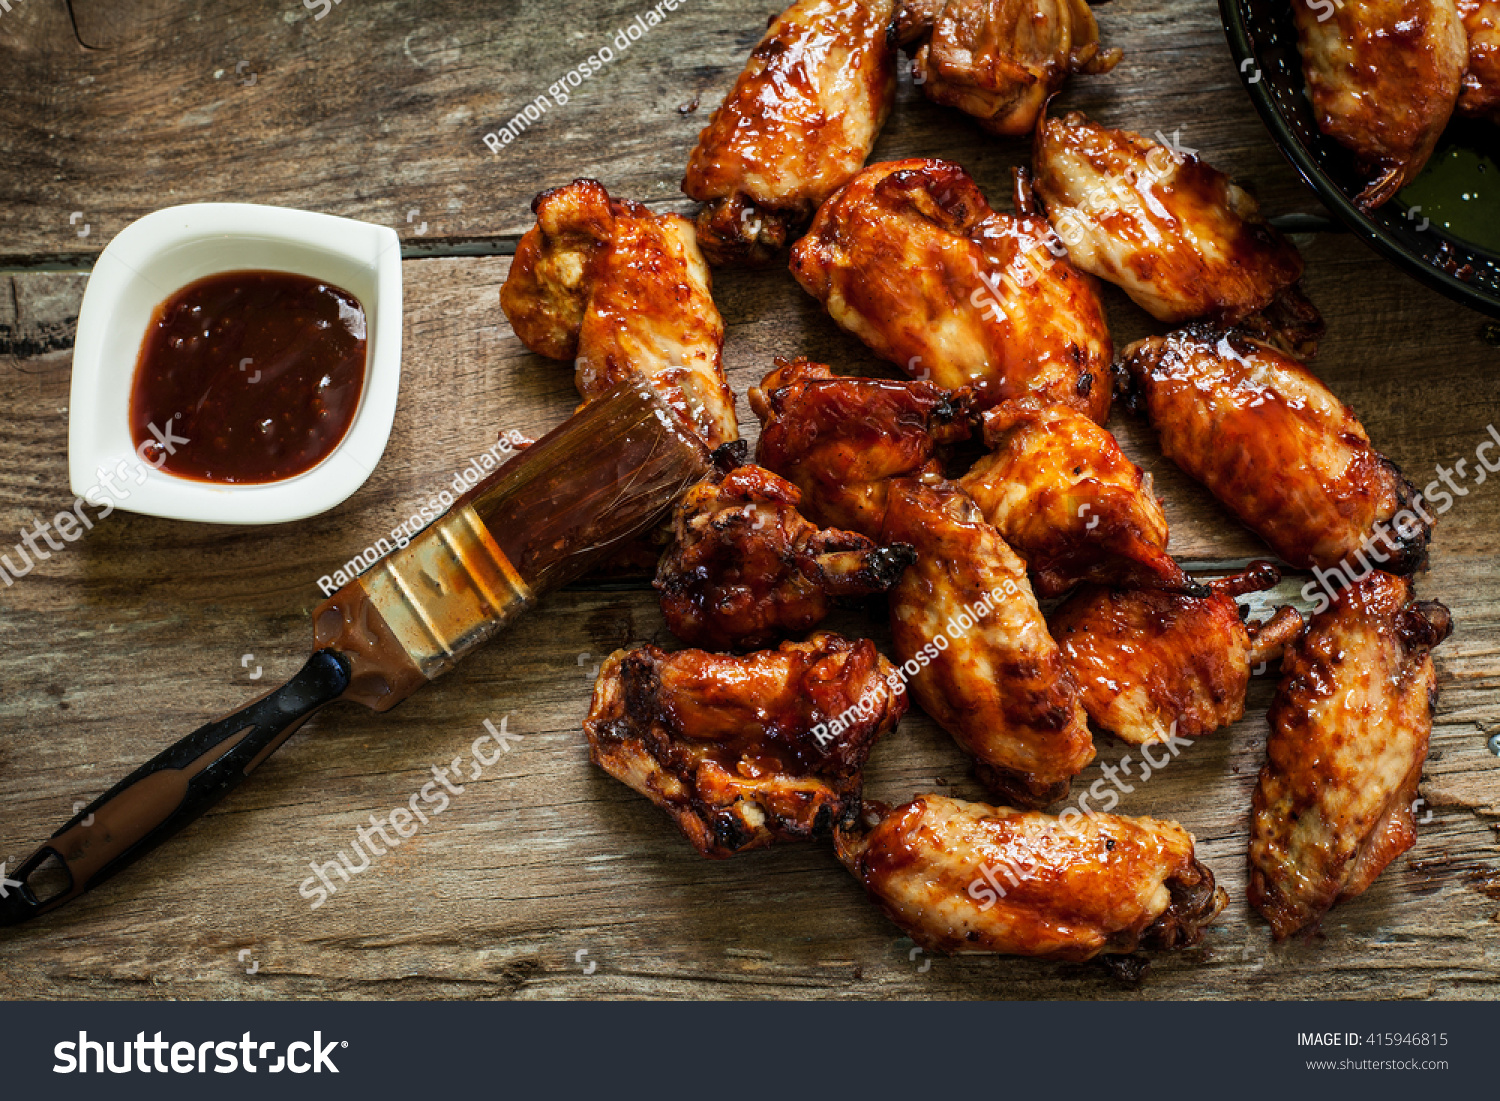 BBQ chicken wings with sauce for dip #415946815